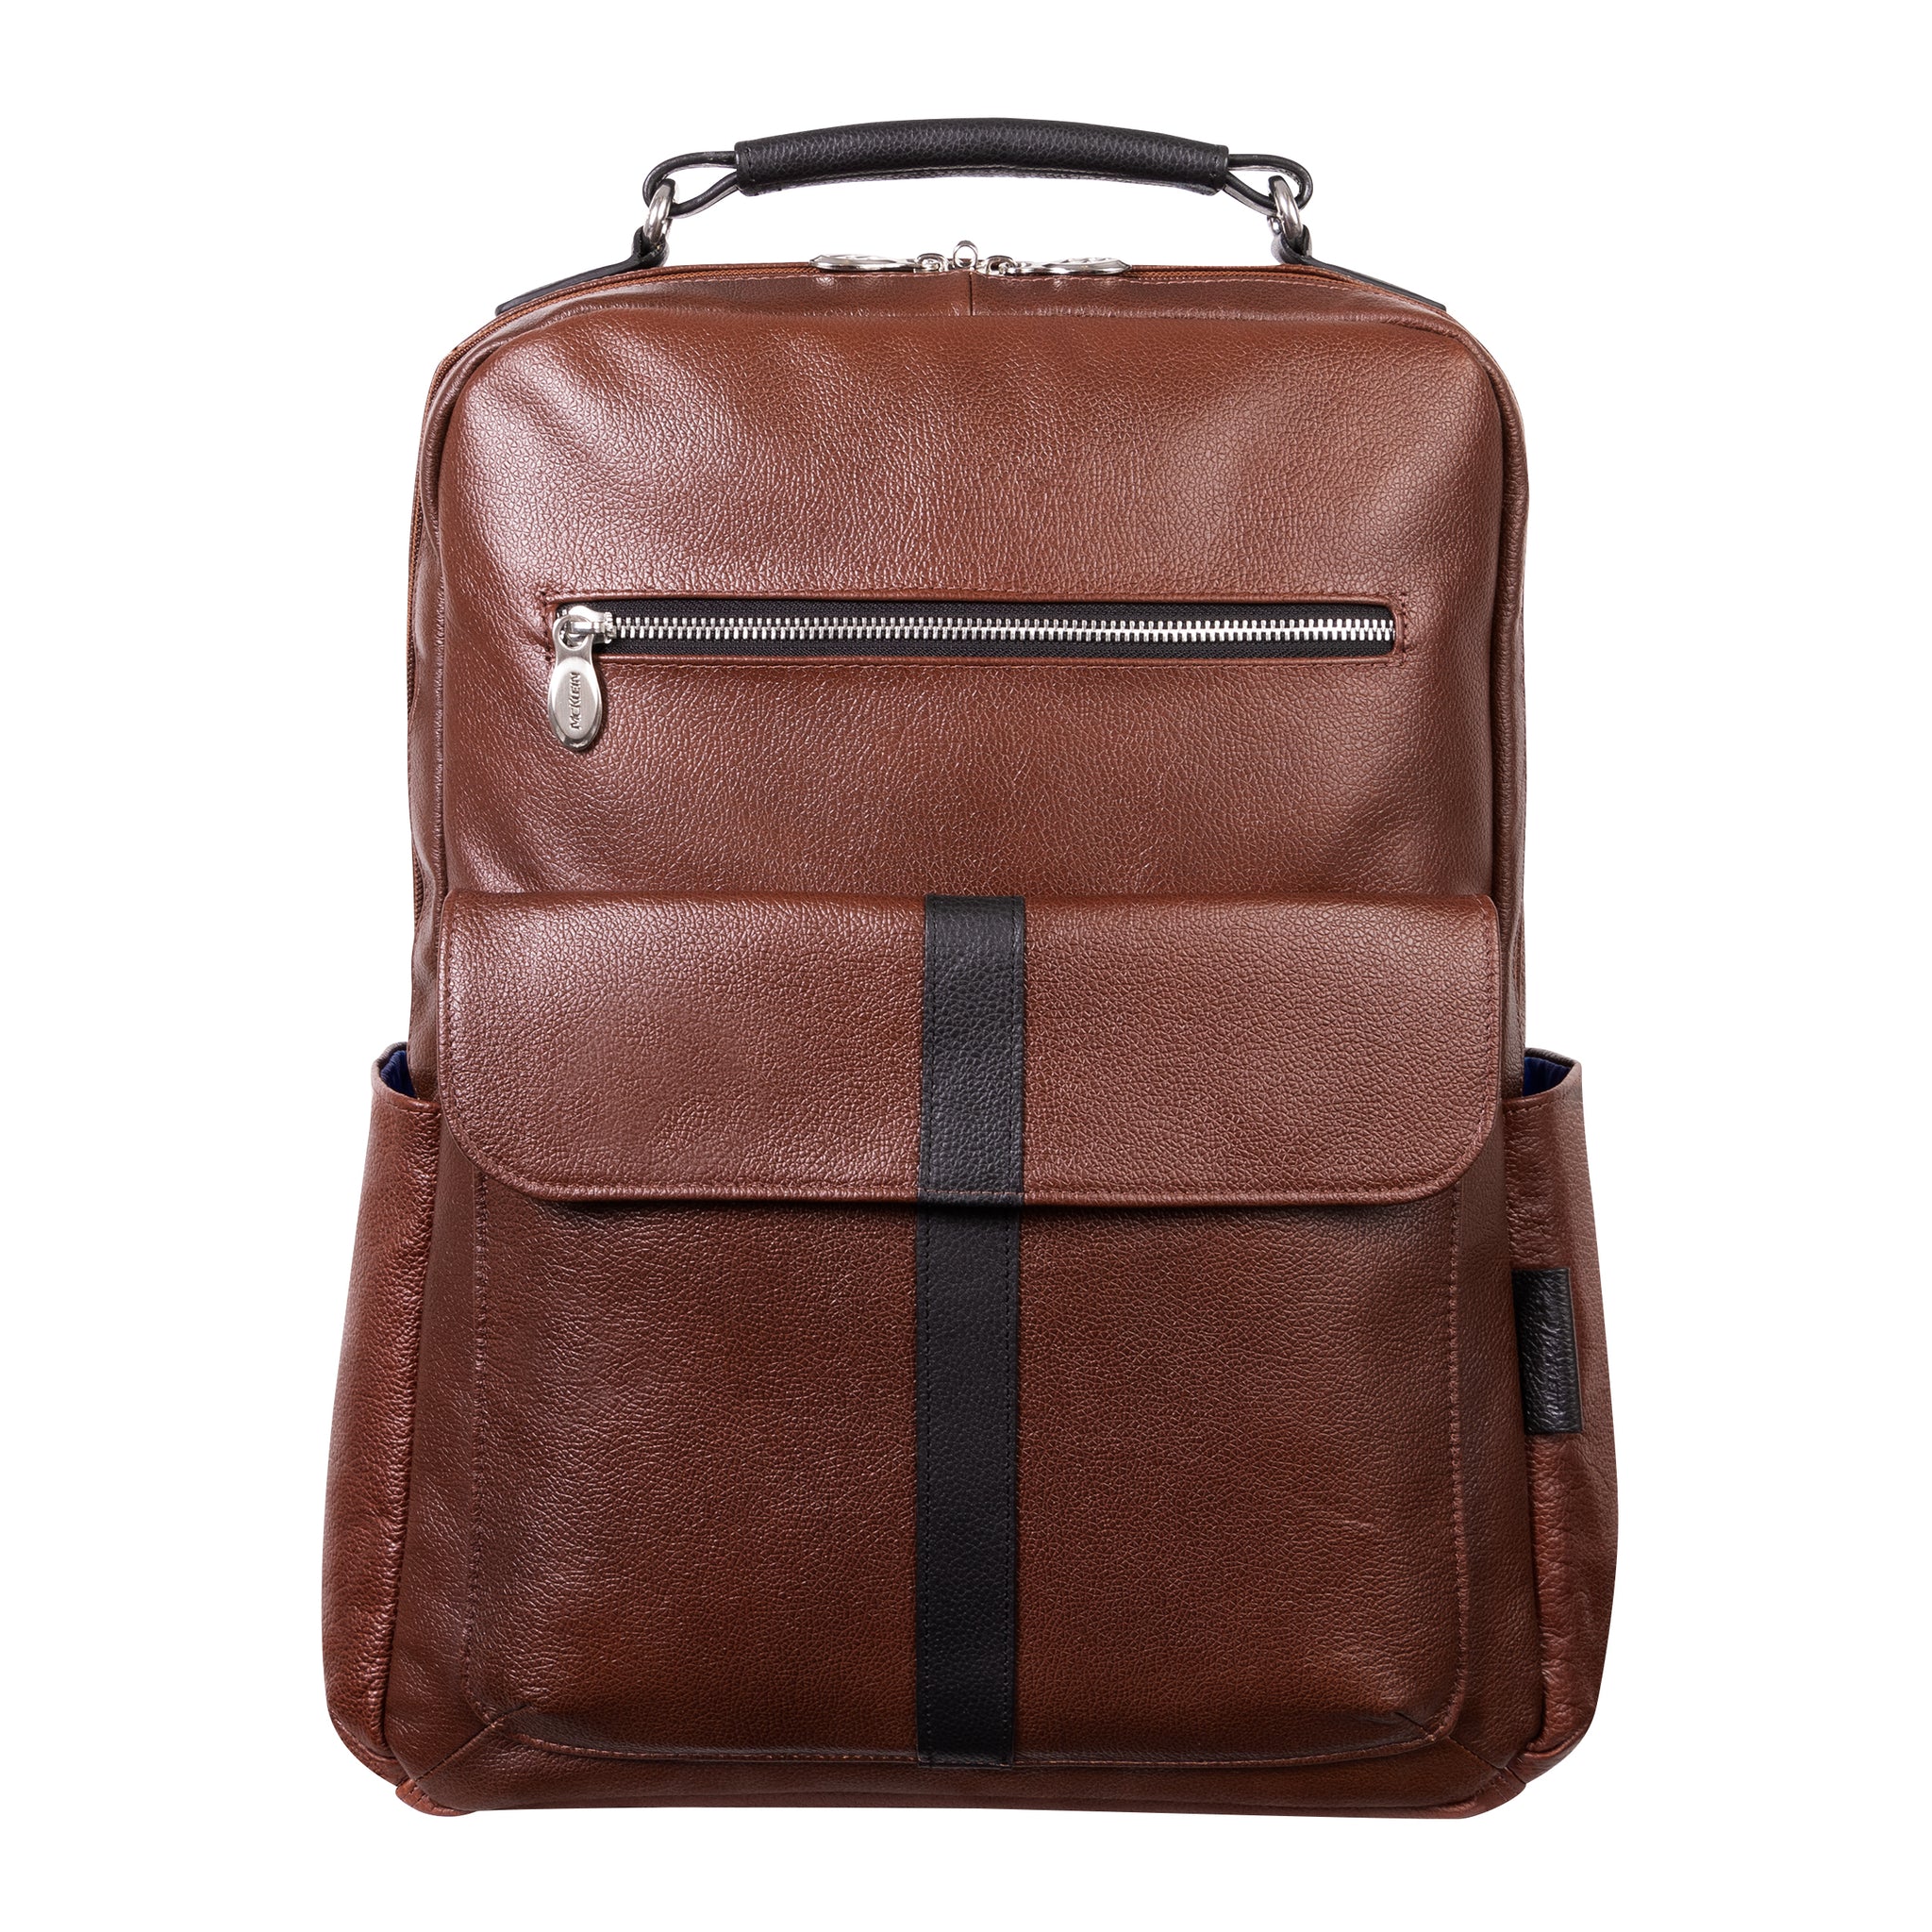 McKlein LOGAN 17" Leather, Two-Tone, Dual-Compartment, Laptop & Tablet Backpack